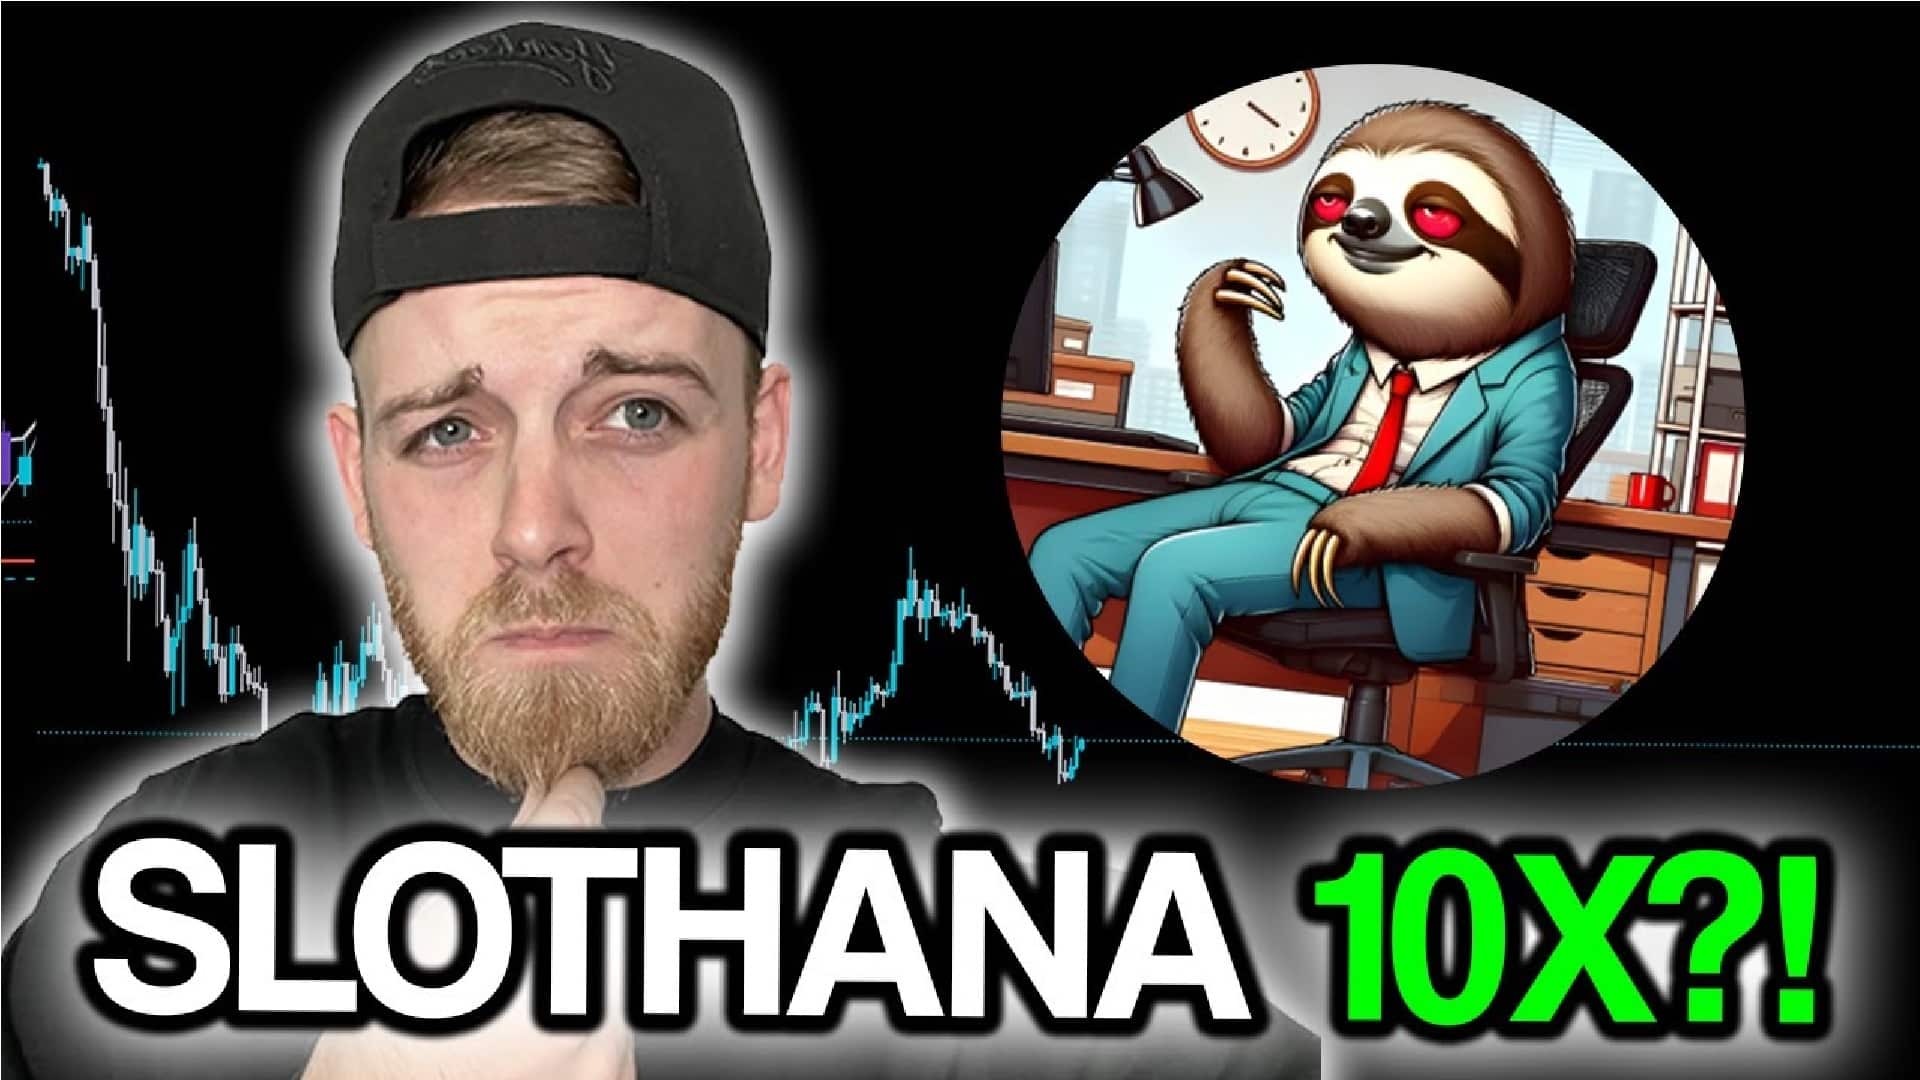 Slothana Surges After Successful IEO – Could These 3 Crypto Presales Follow Suit Upon Launch?